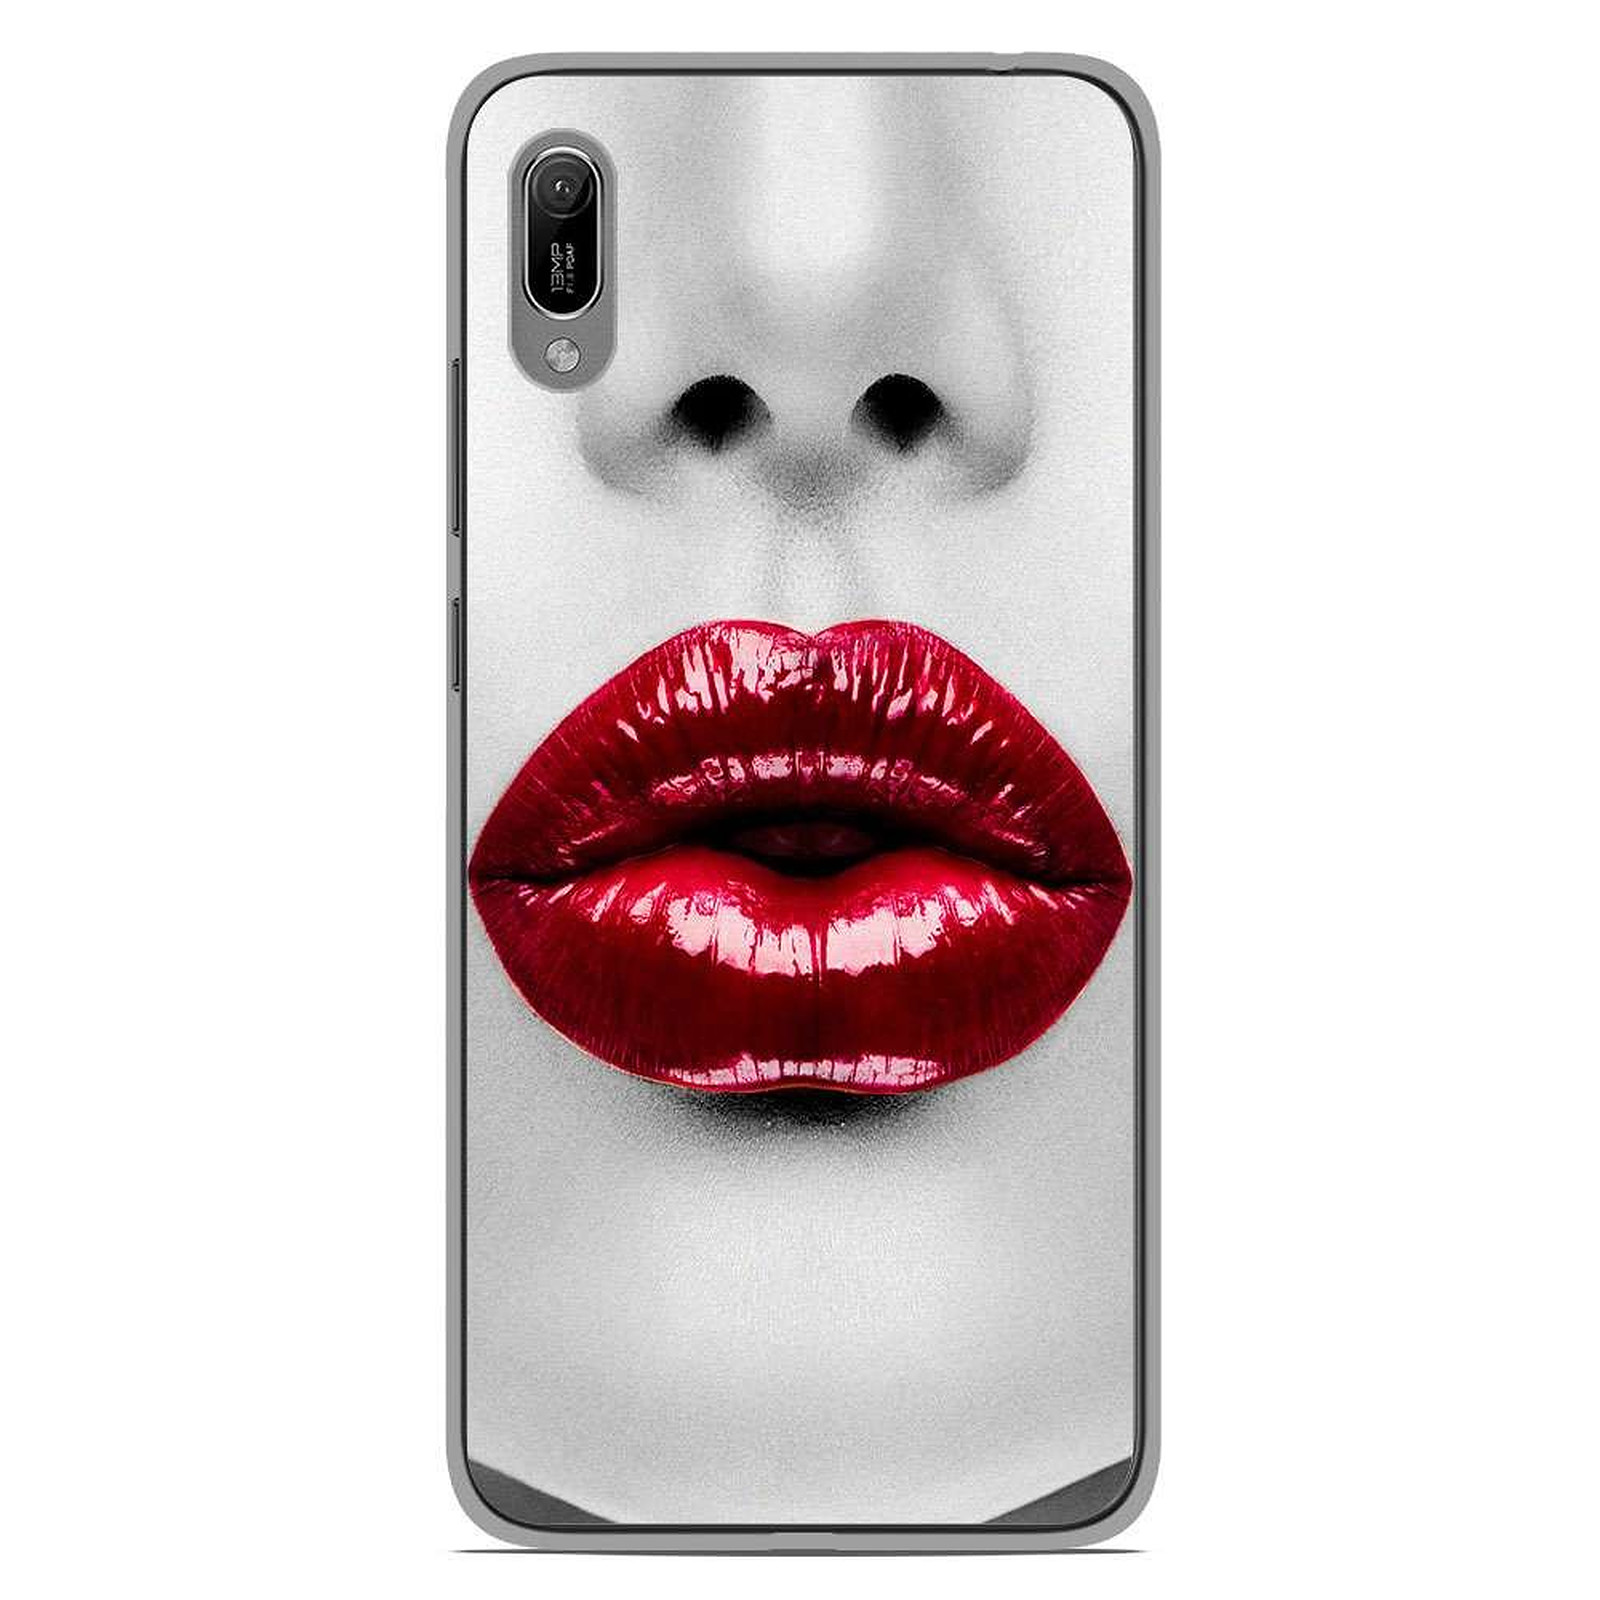 1001 Coques Coque silicone gel Huawei Y6 2019 motif Lèvres Rouges - Coque telephone 1001Coques